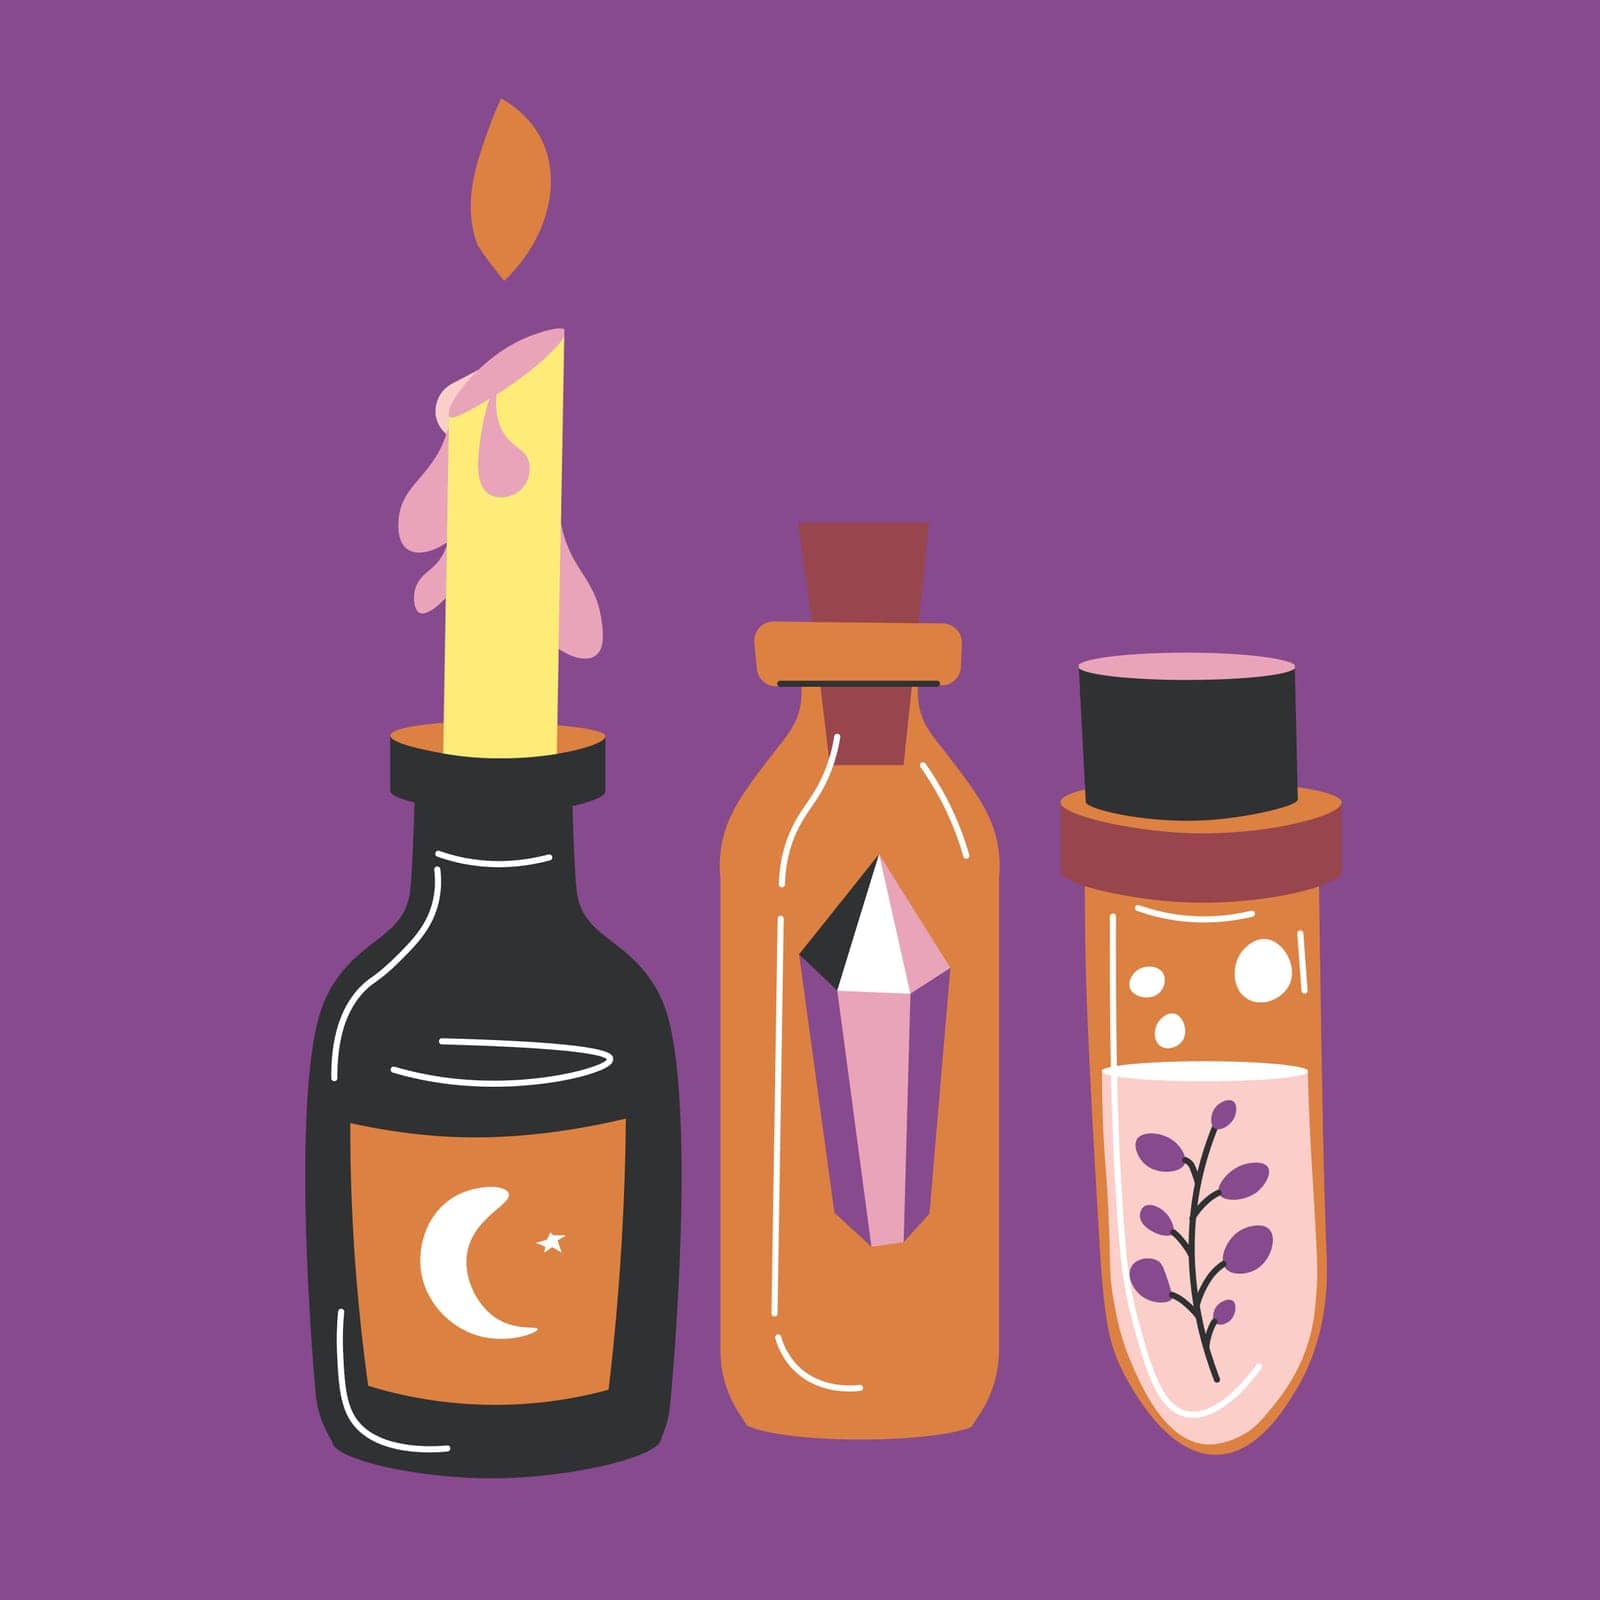 Witchcraft and magic spells, magic ingredients in vials. Isolated candle with moon sign, bottle with amethyst gemstone, bottle with elixir and herb leaf inside. Spiritual ritual. Vector in flat style